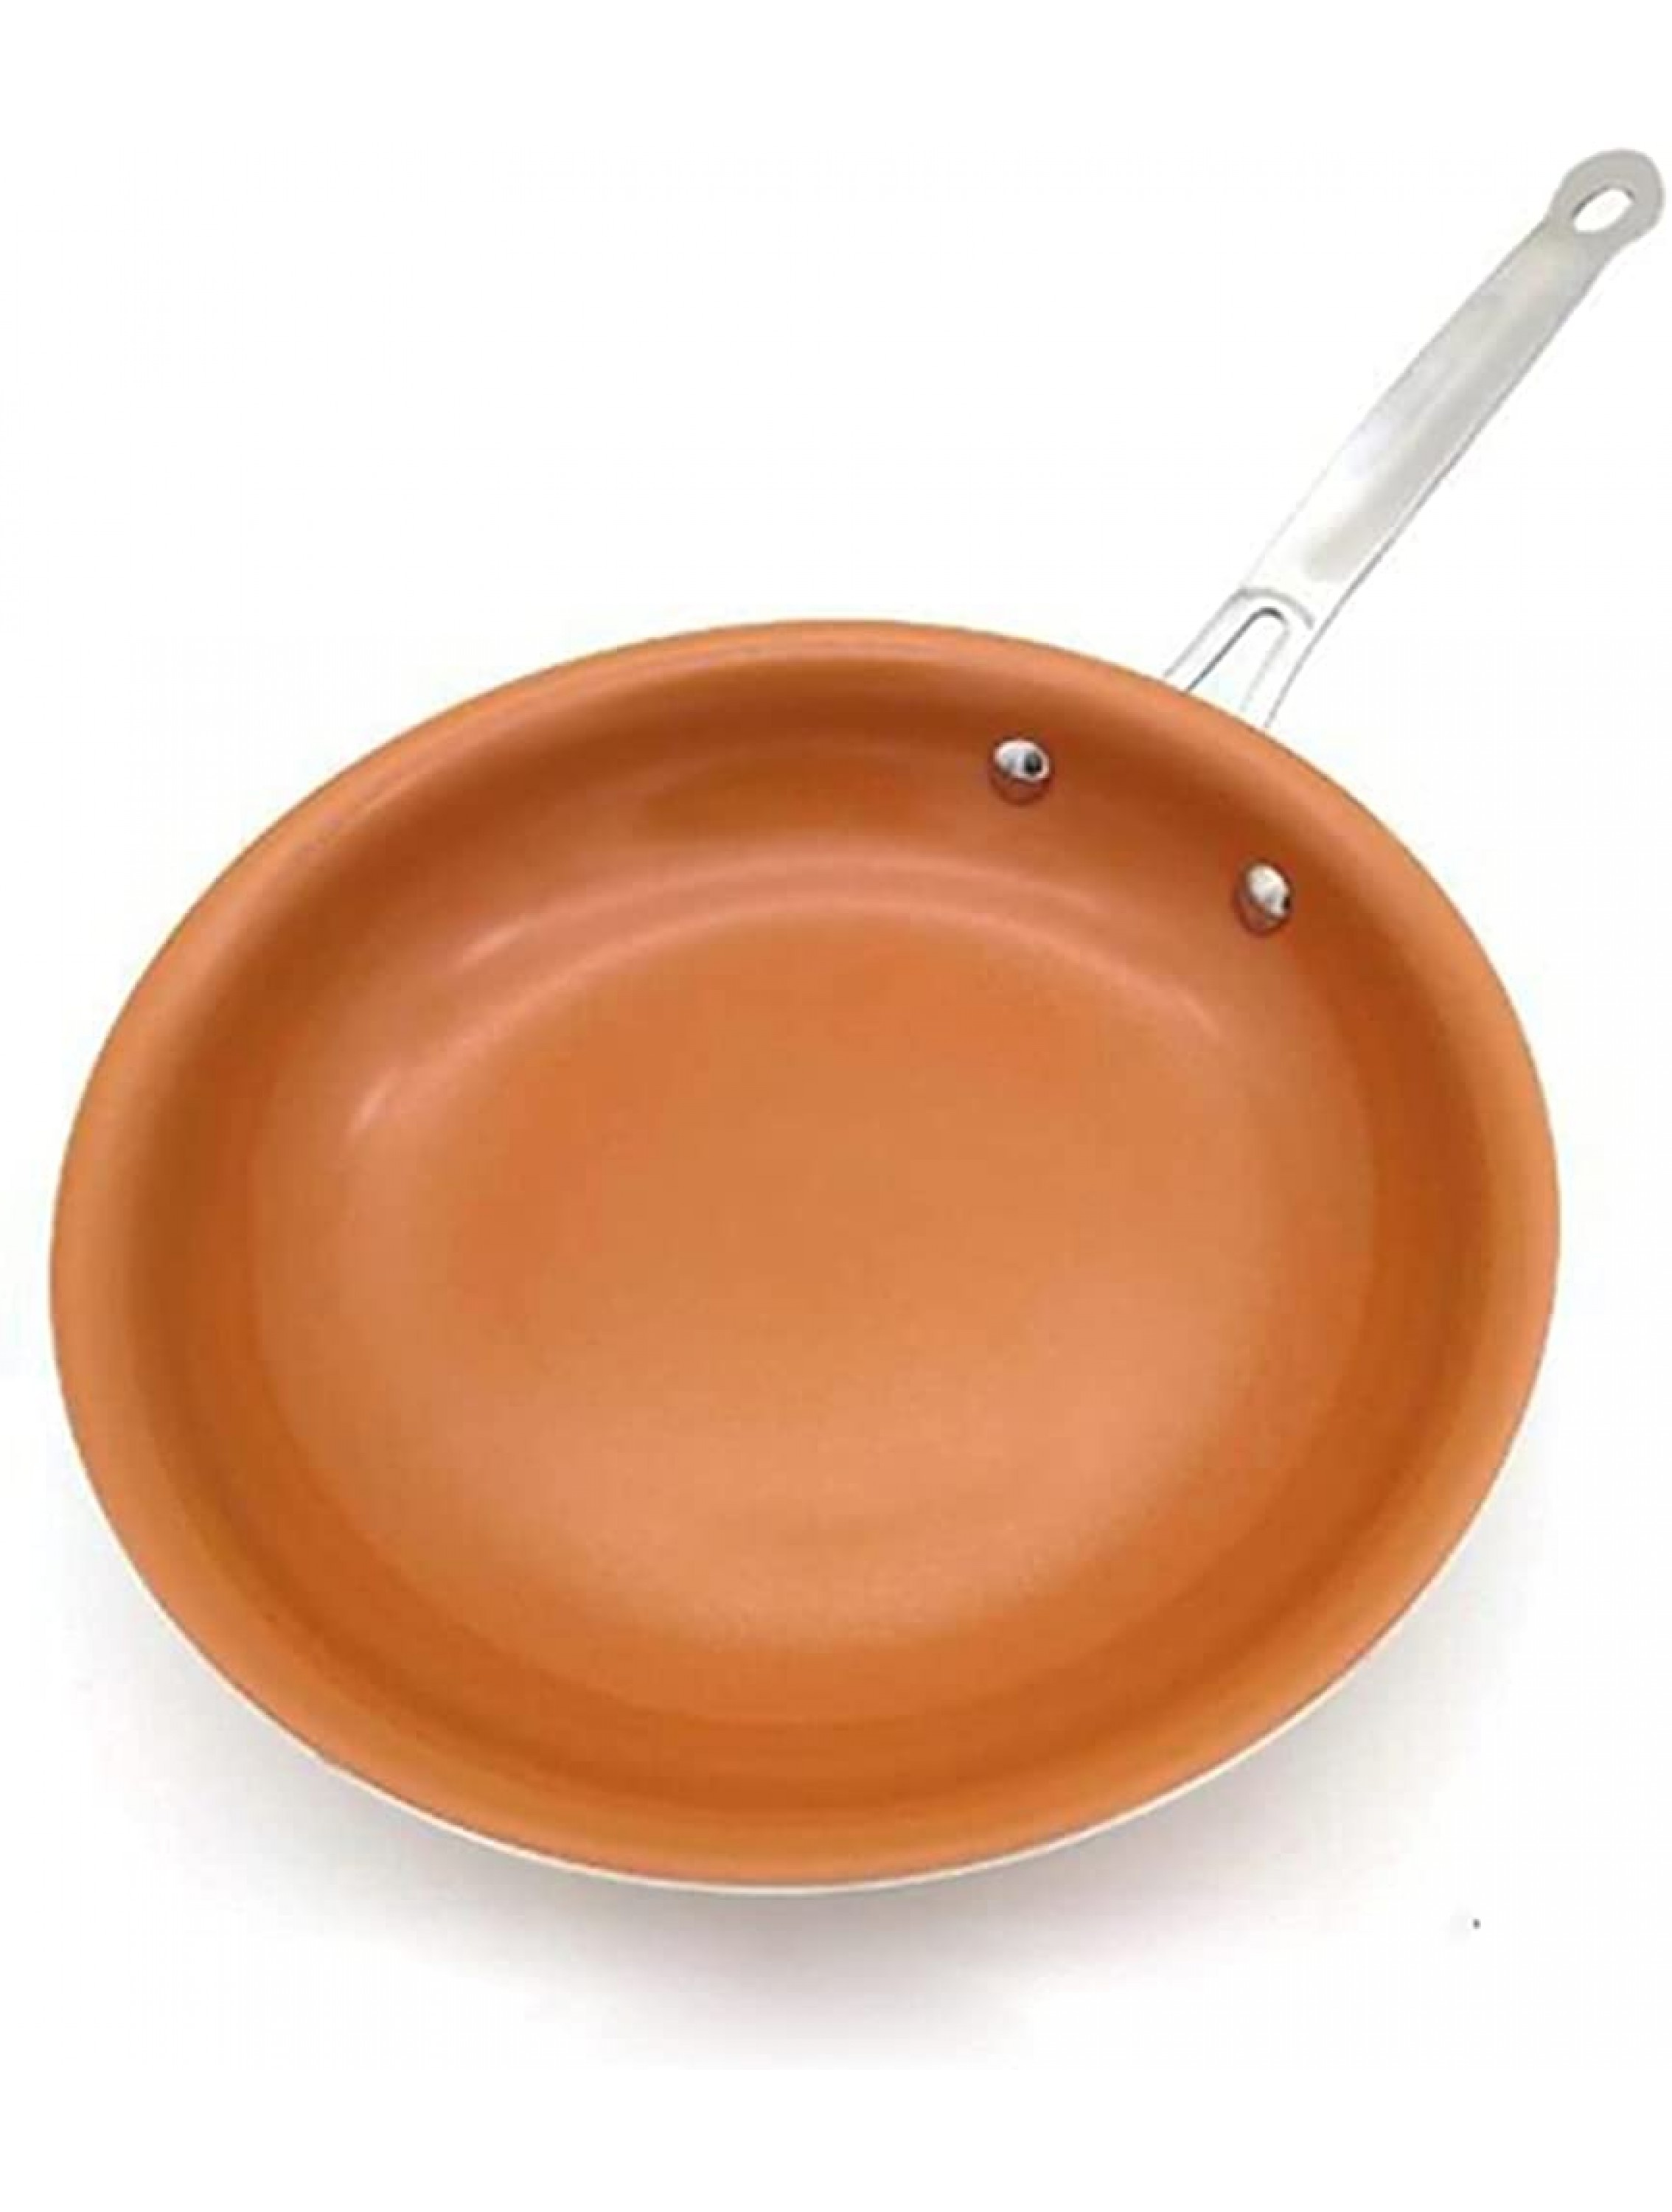 SHUOG Non-stick Copper Frying Pans Skillets With Coating Induction Cooking Oven Cooking Pot Nonstick Pan Cookware Chef's Pans Color : 28cm - BR4CUJRXE